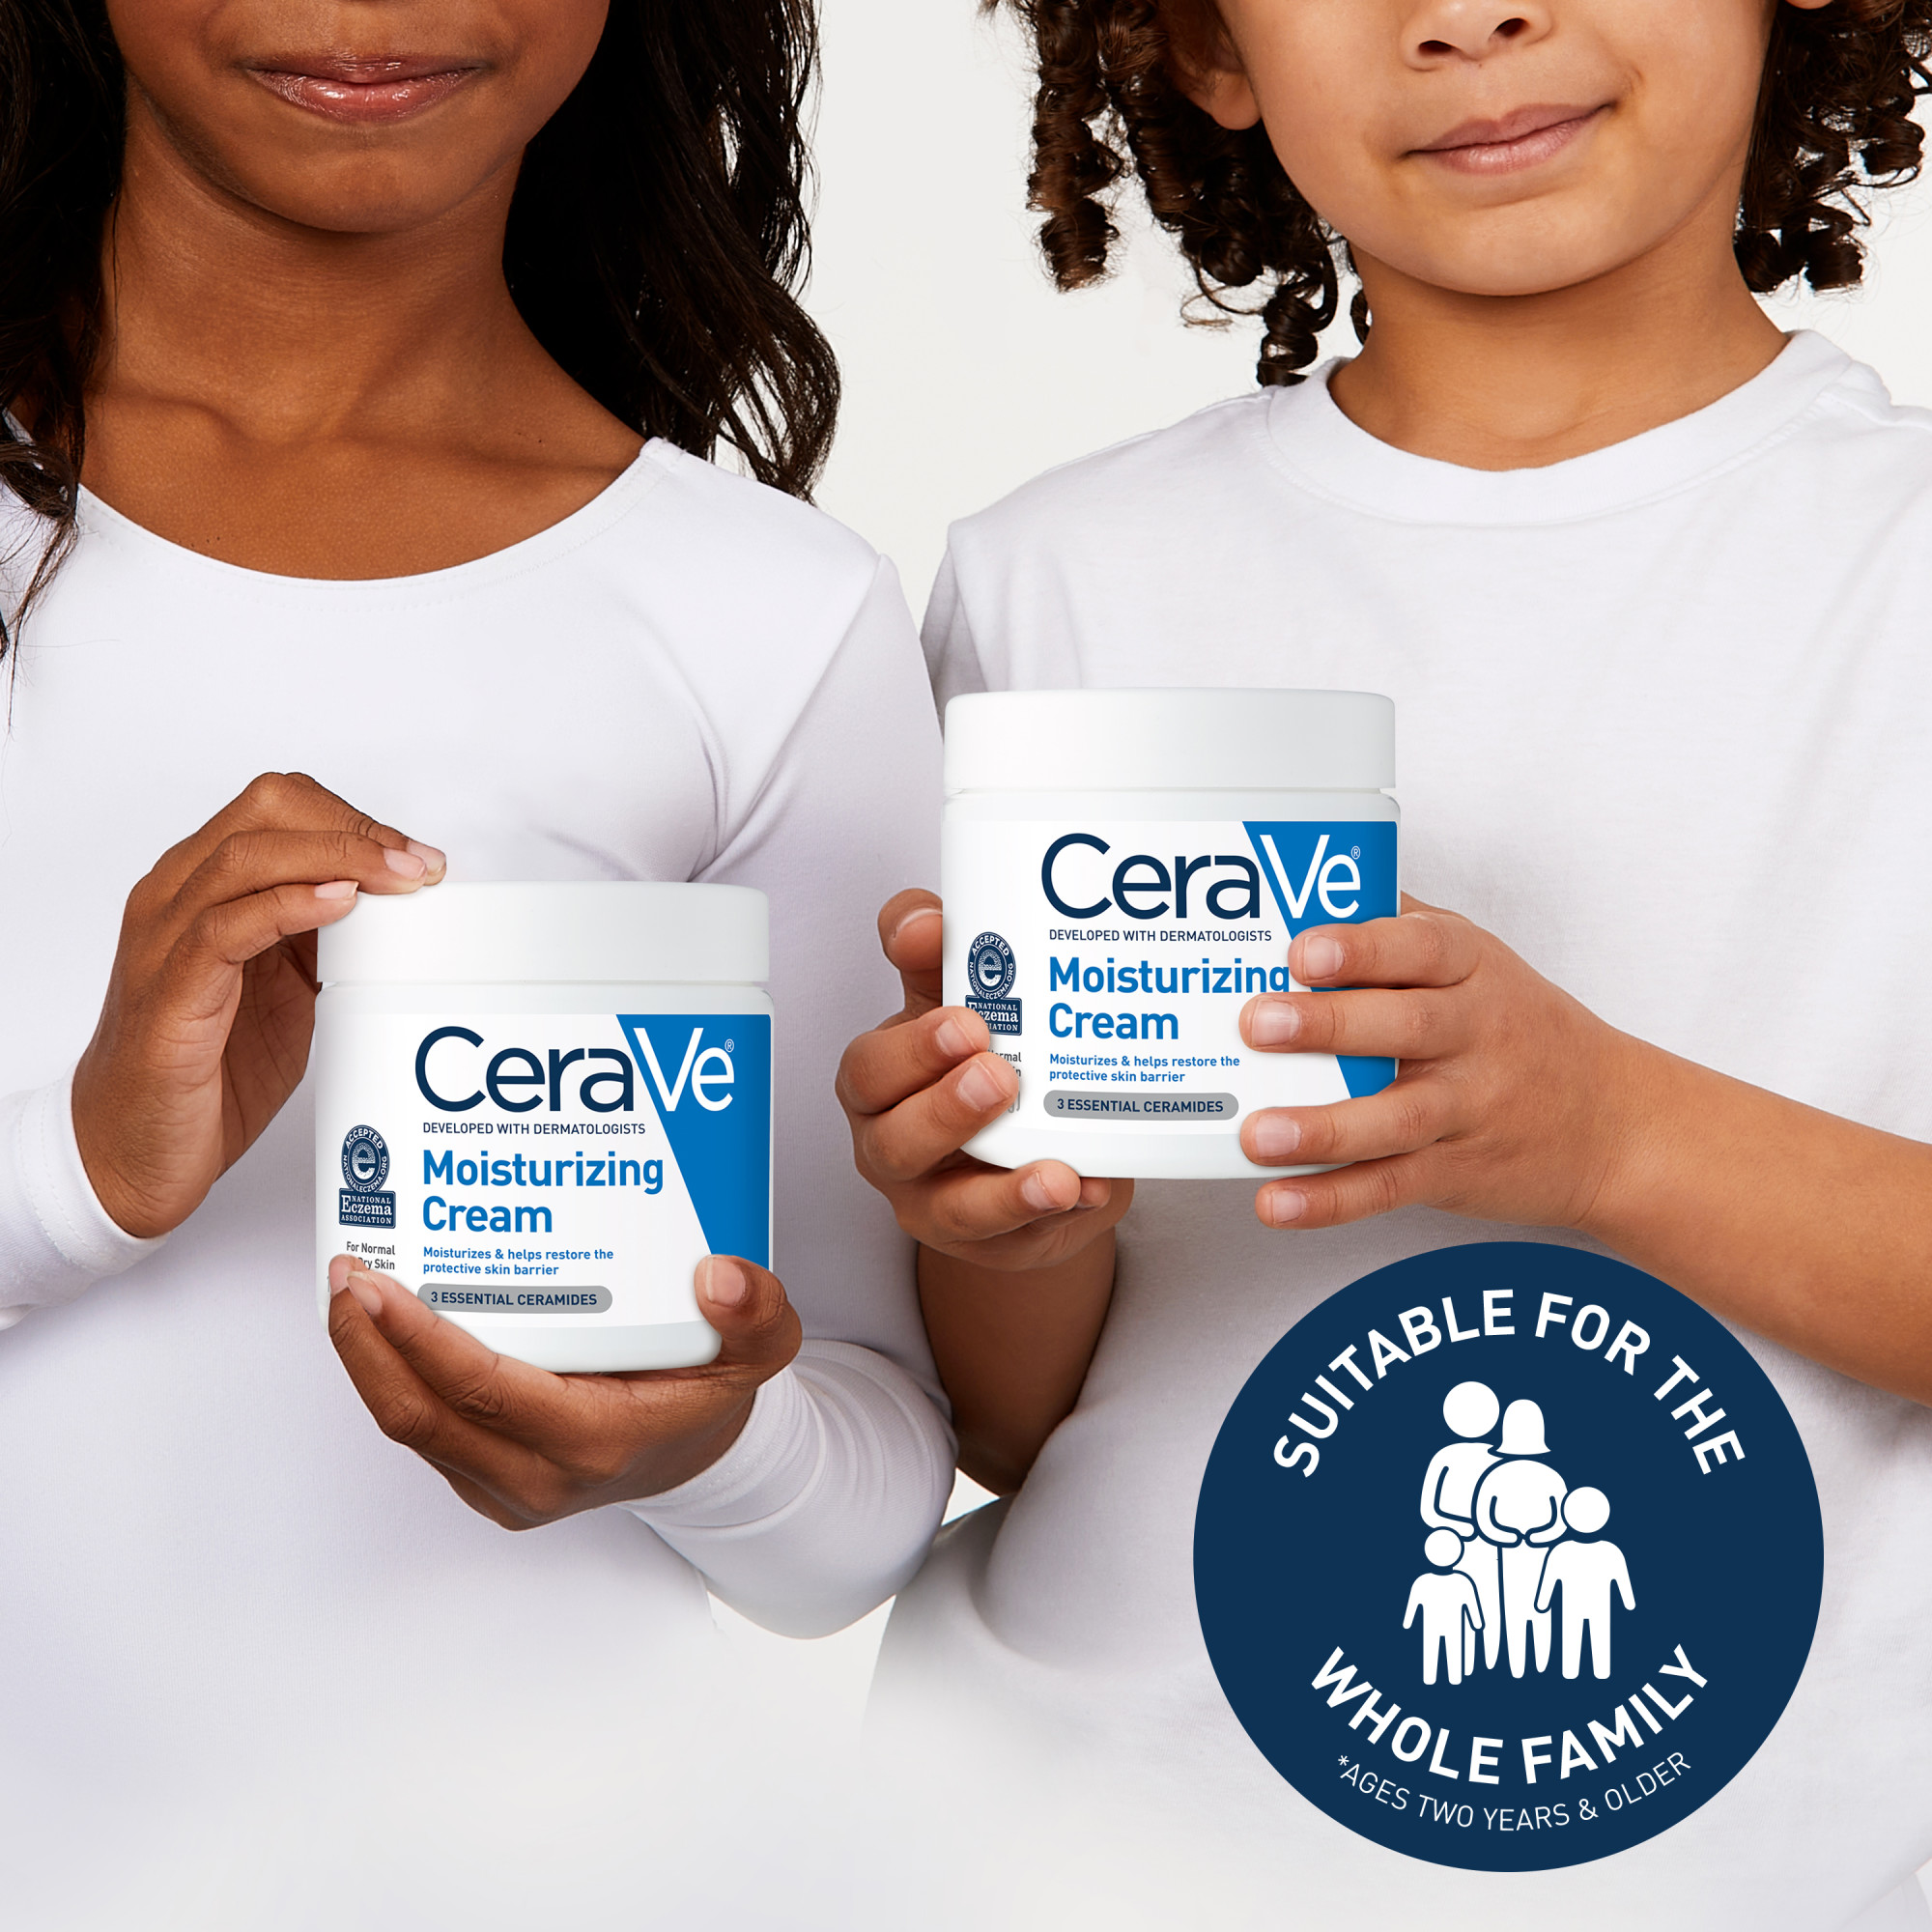 CeraVe Moisturizing Cream, Face & Body Moisturizer for Normal to Very Dry Skin, 16 oz - image 9 of 14